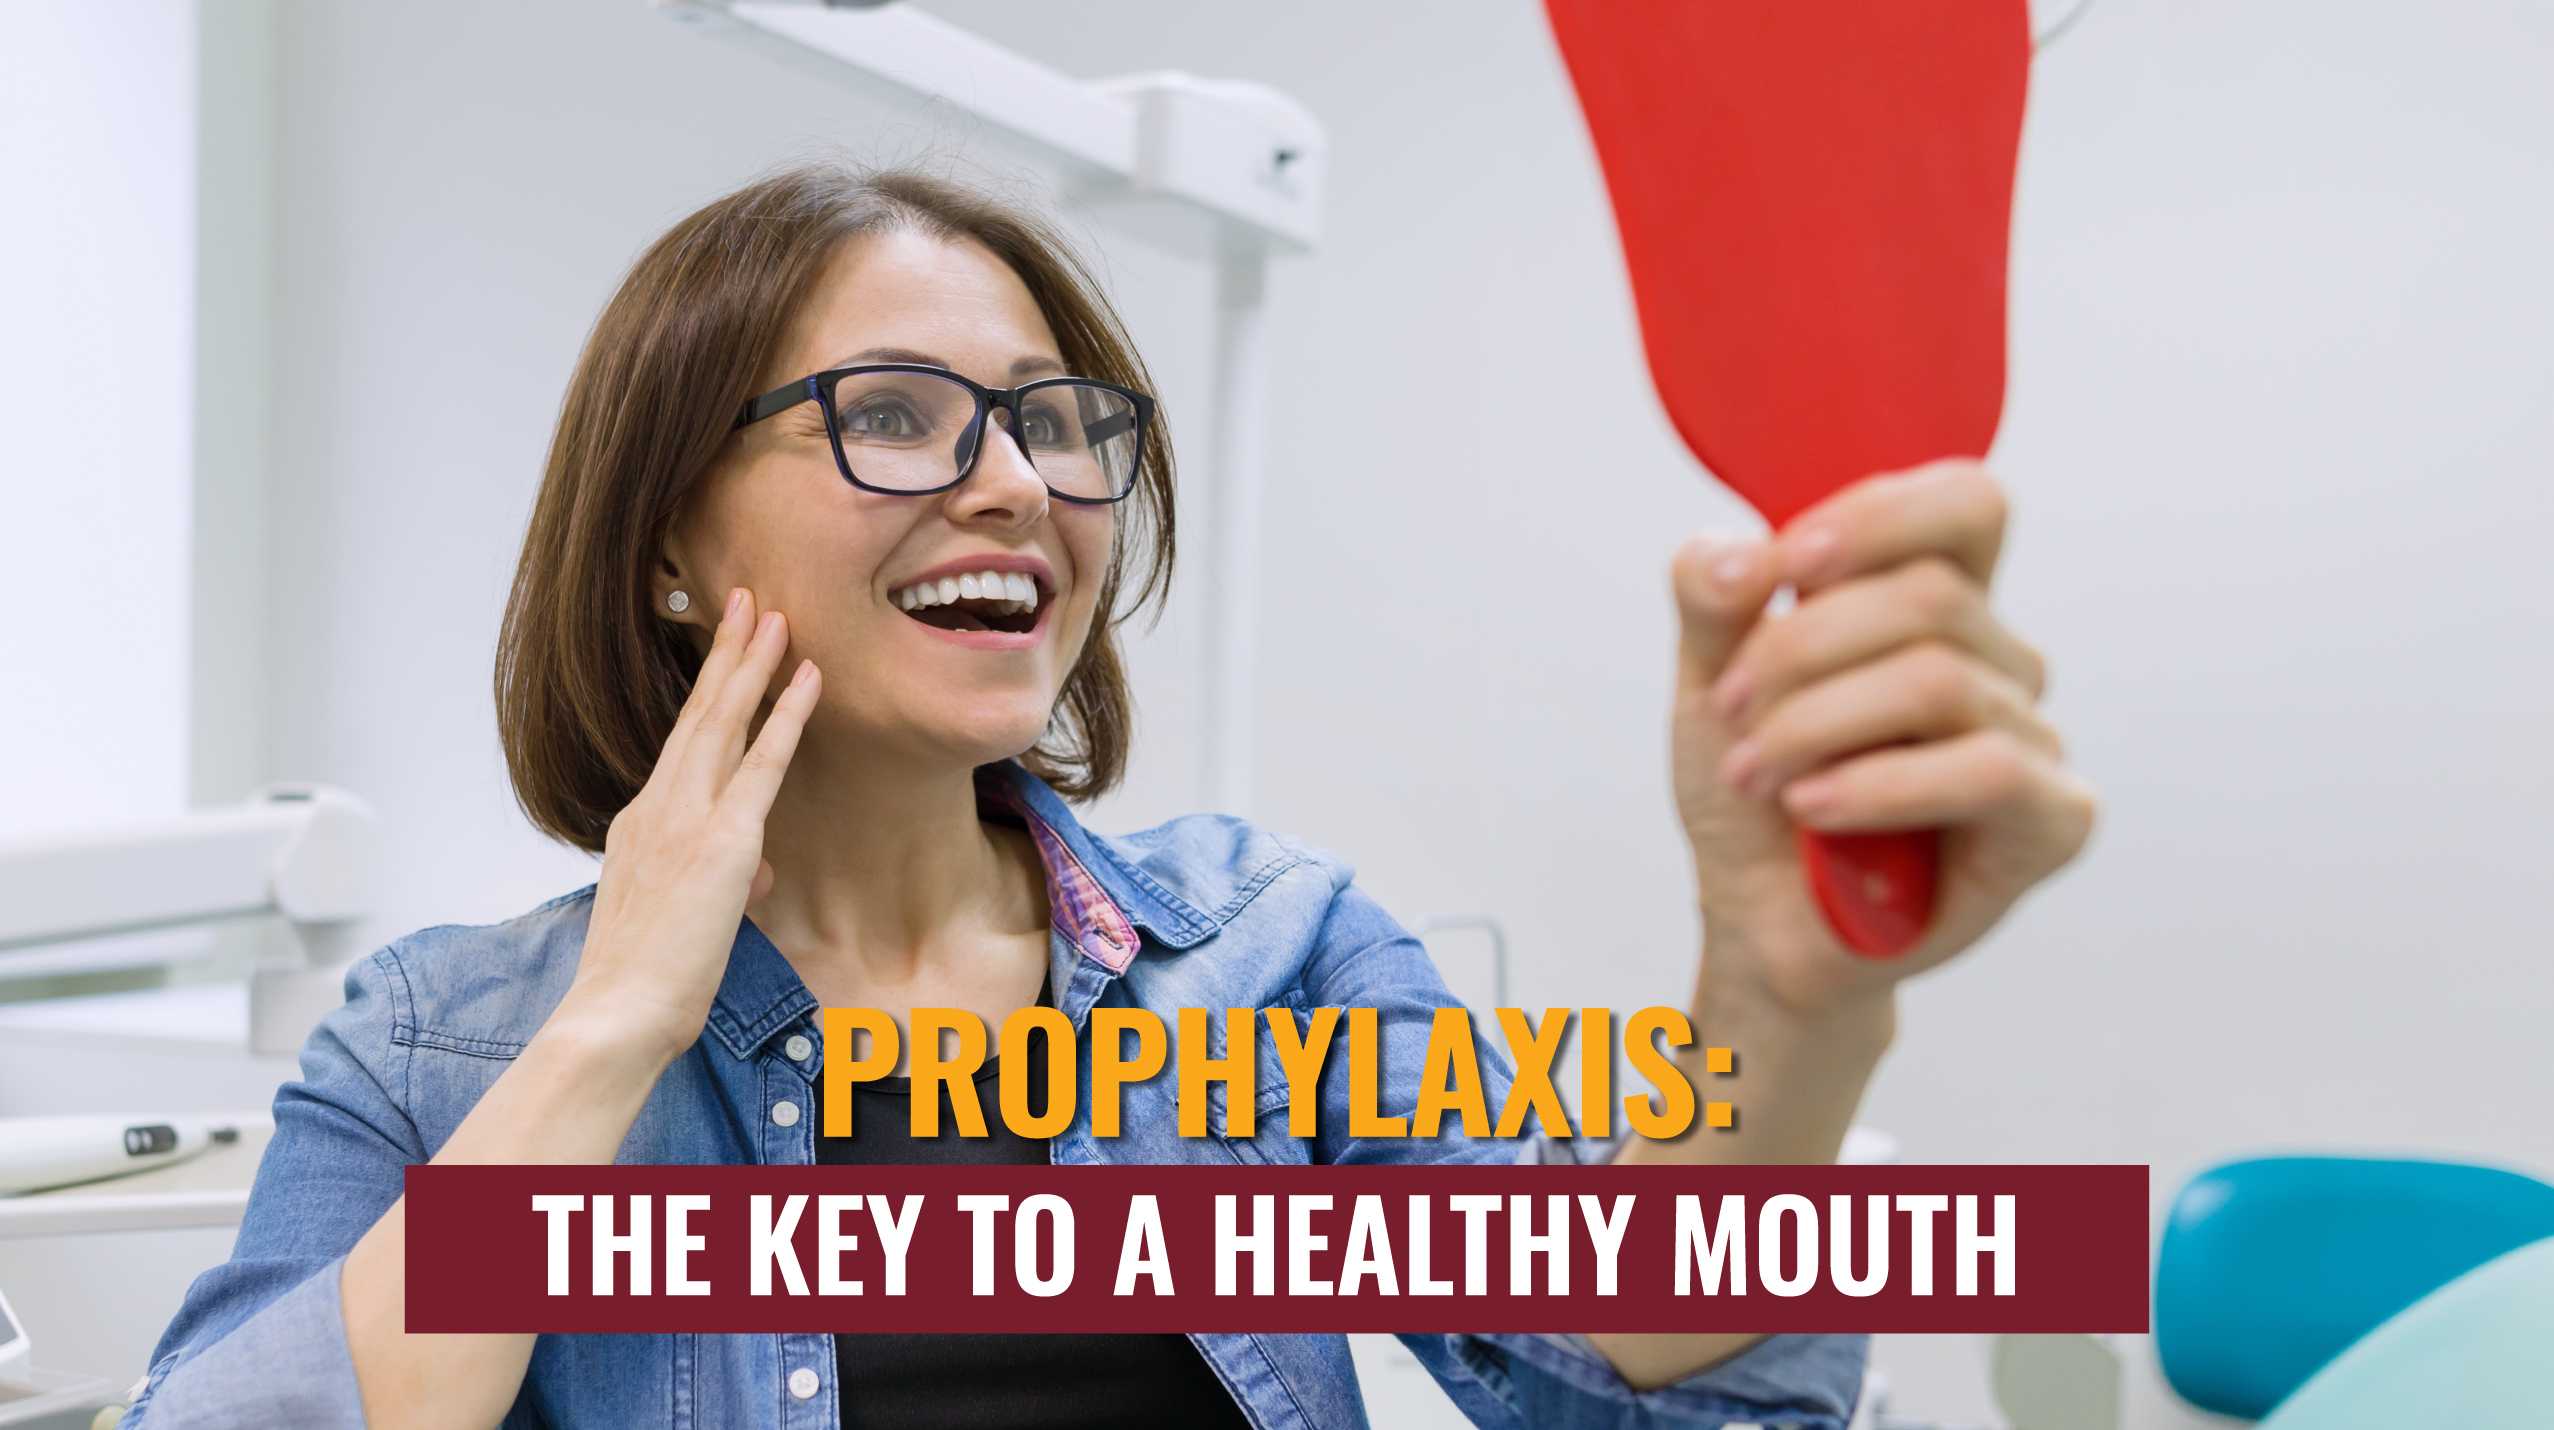 Prophylaxis: The Key to a Healthy Mouth